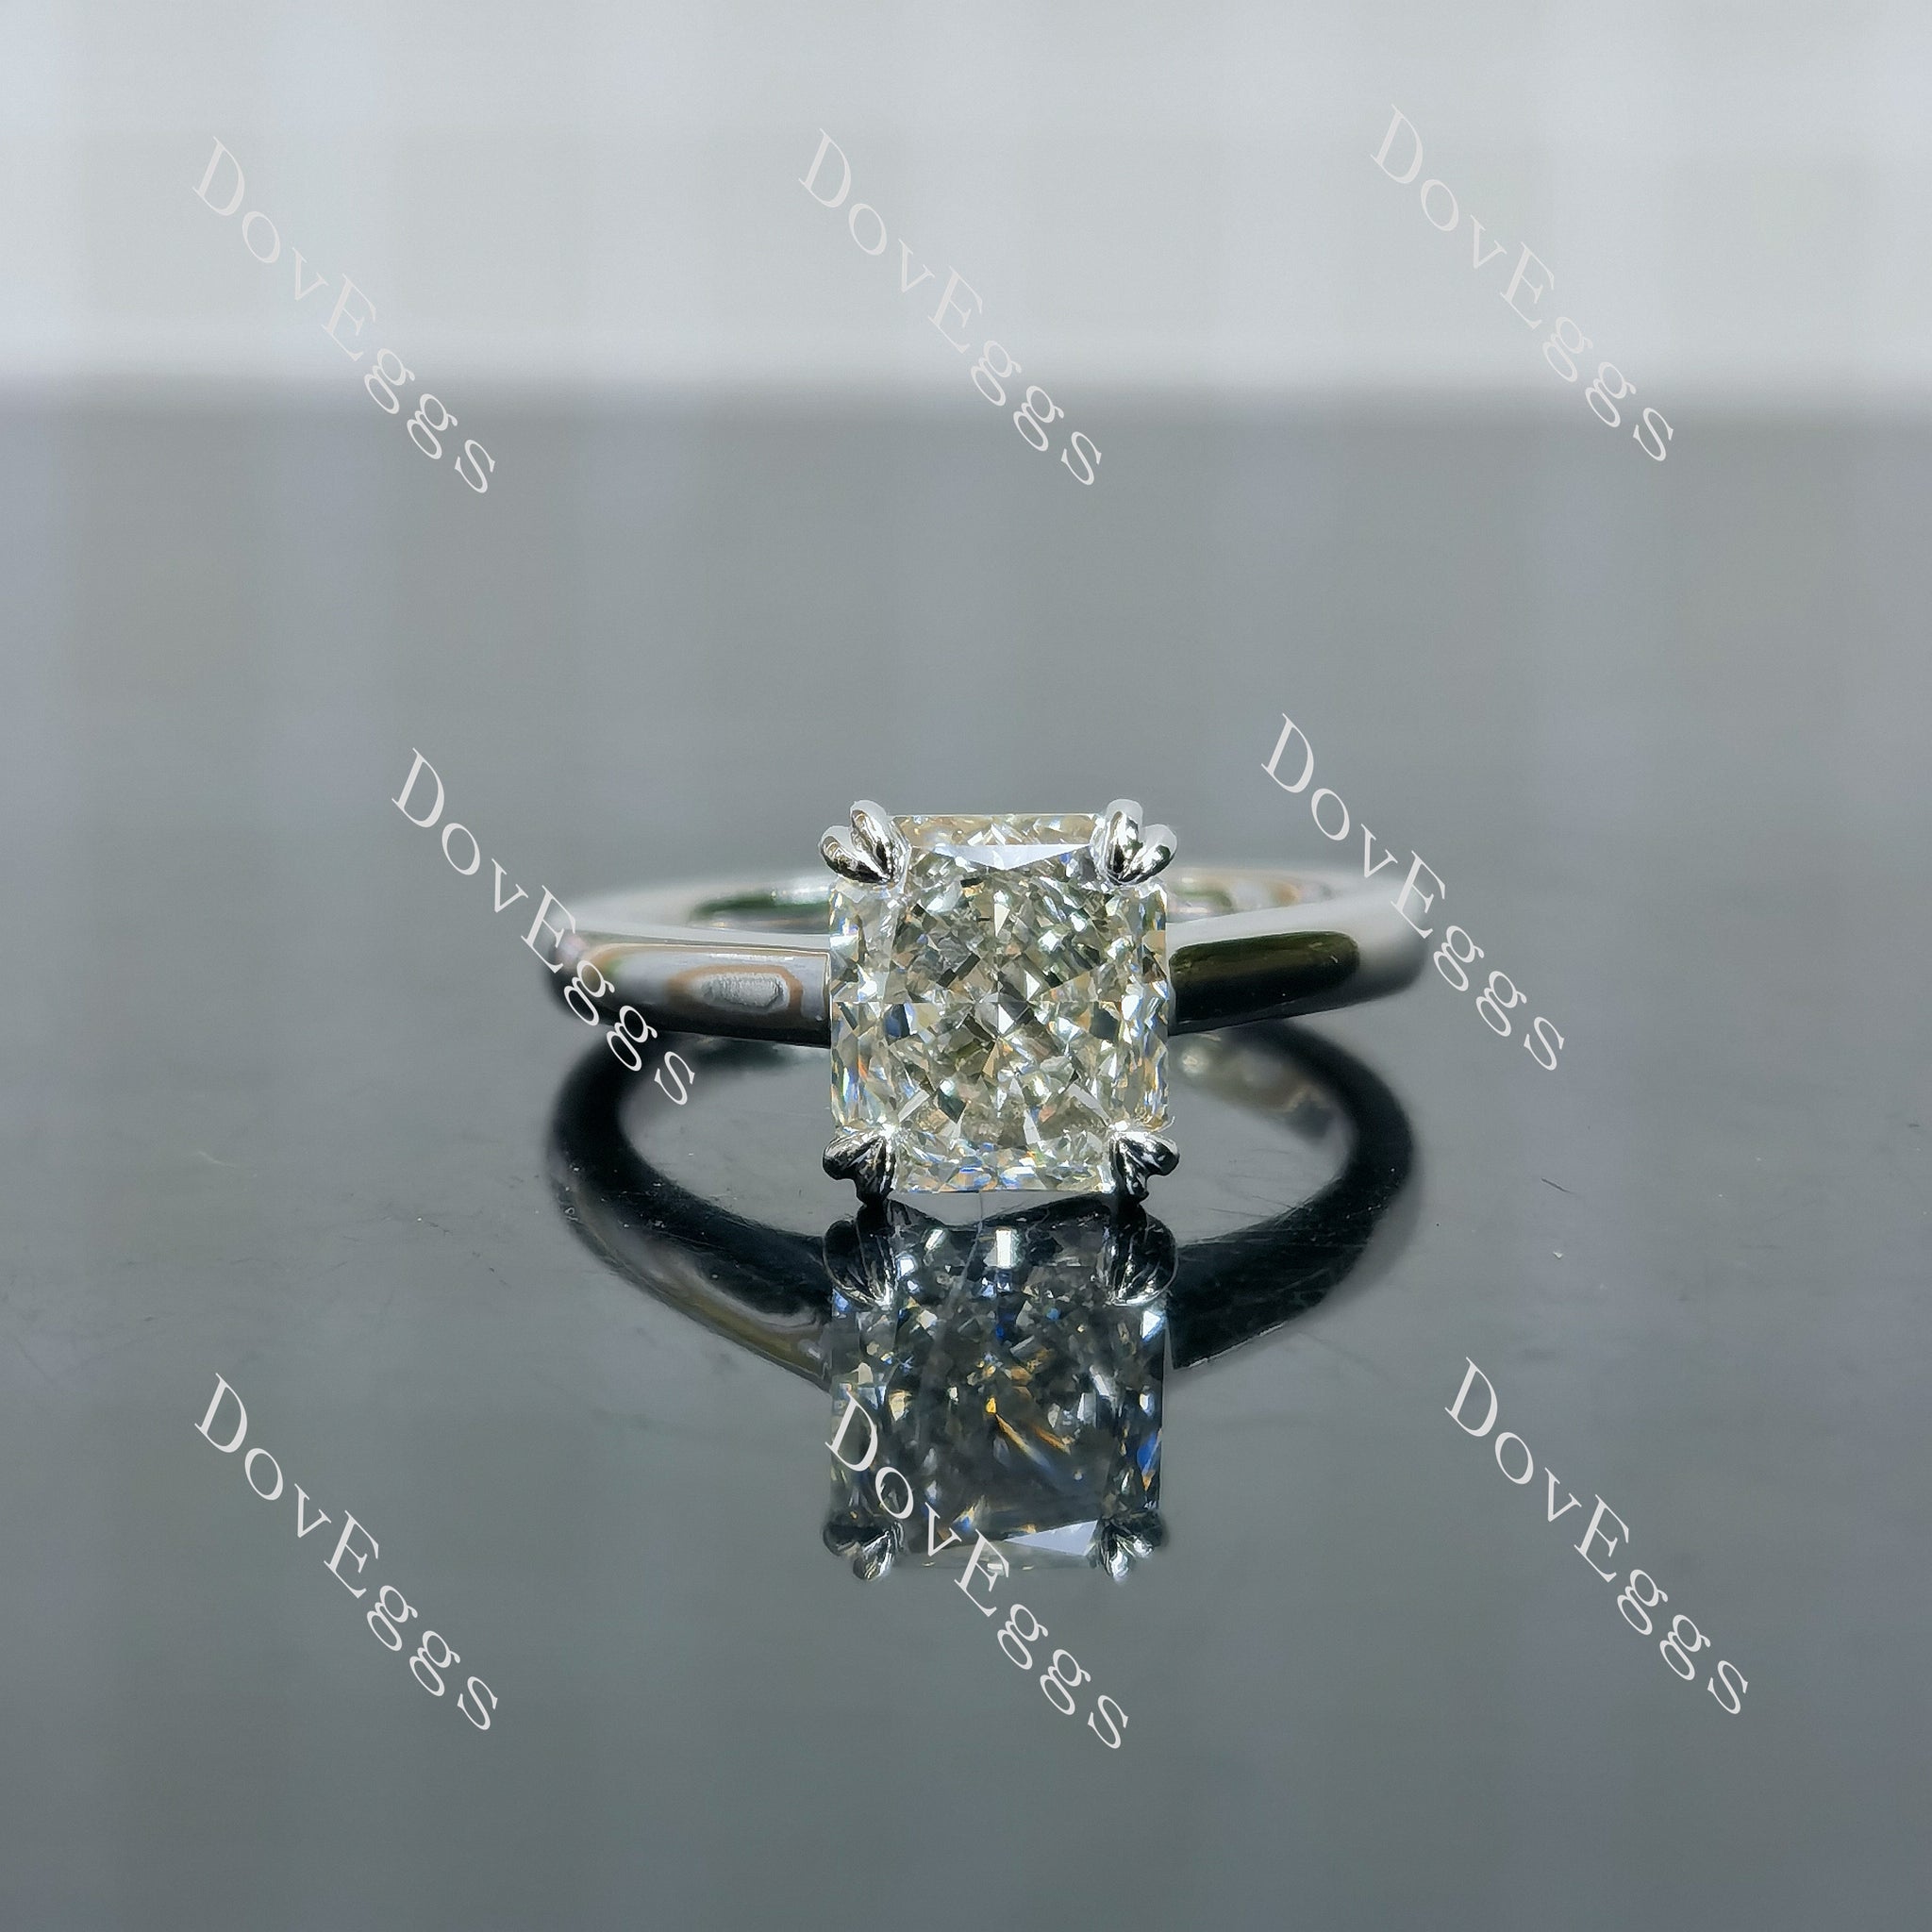 The Jessica Radiant Pave Lab Grown Diamond Engagement Ring